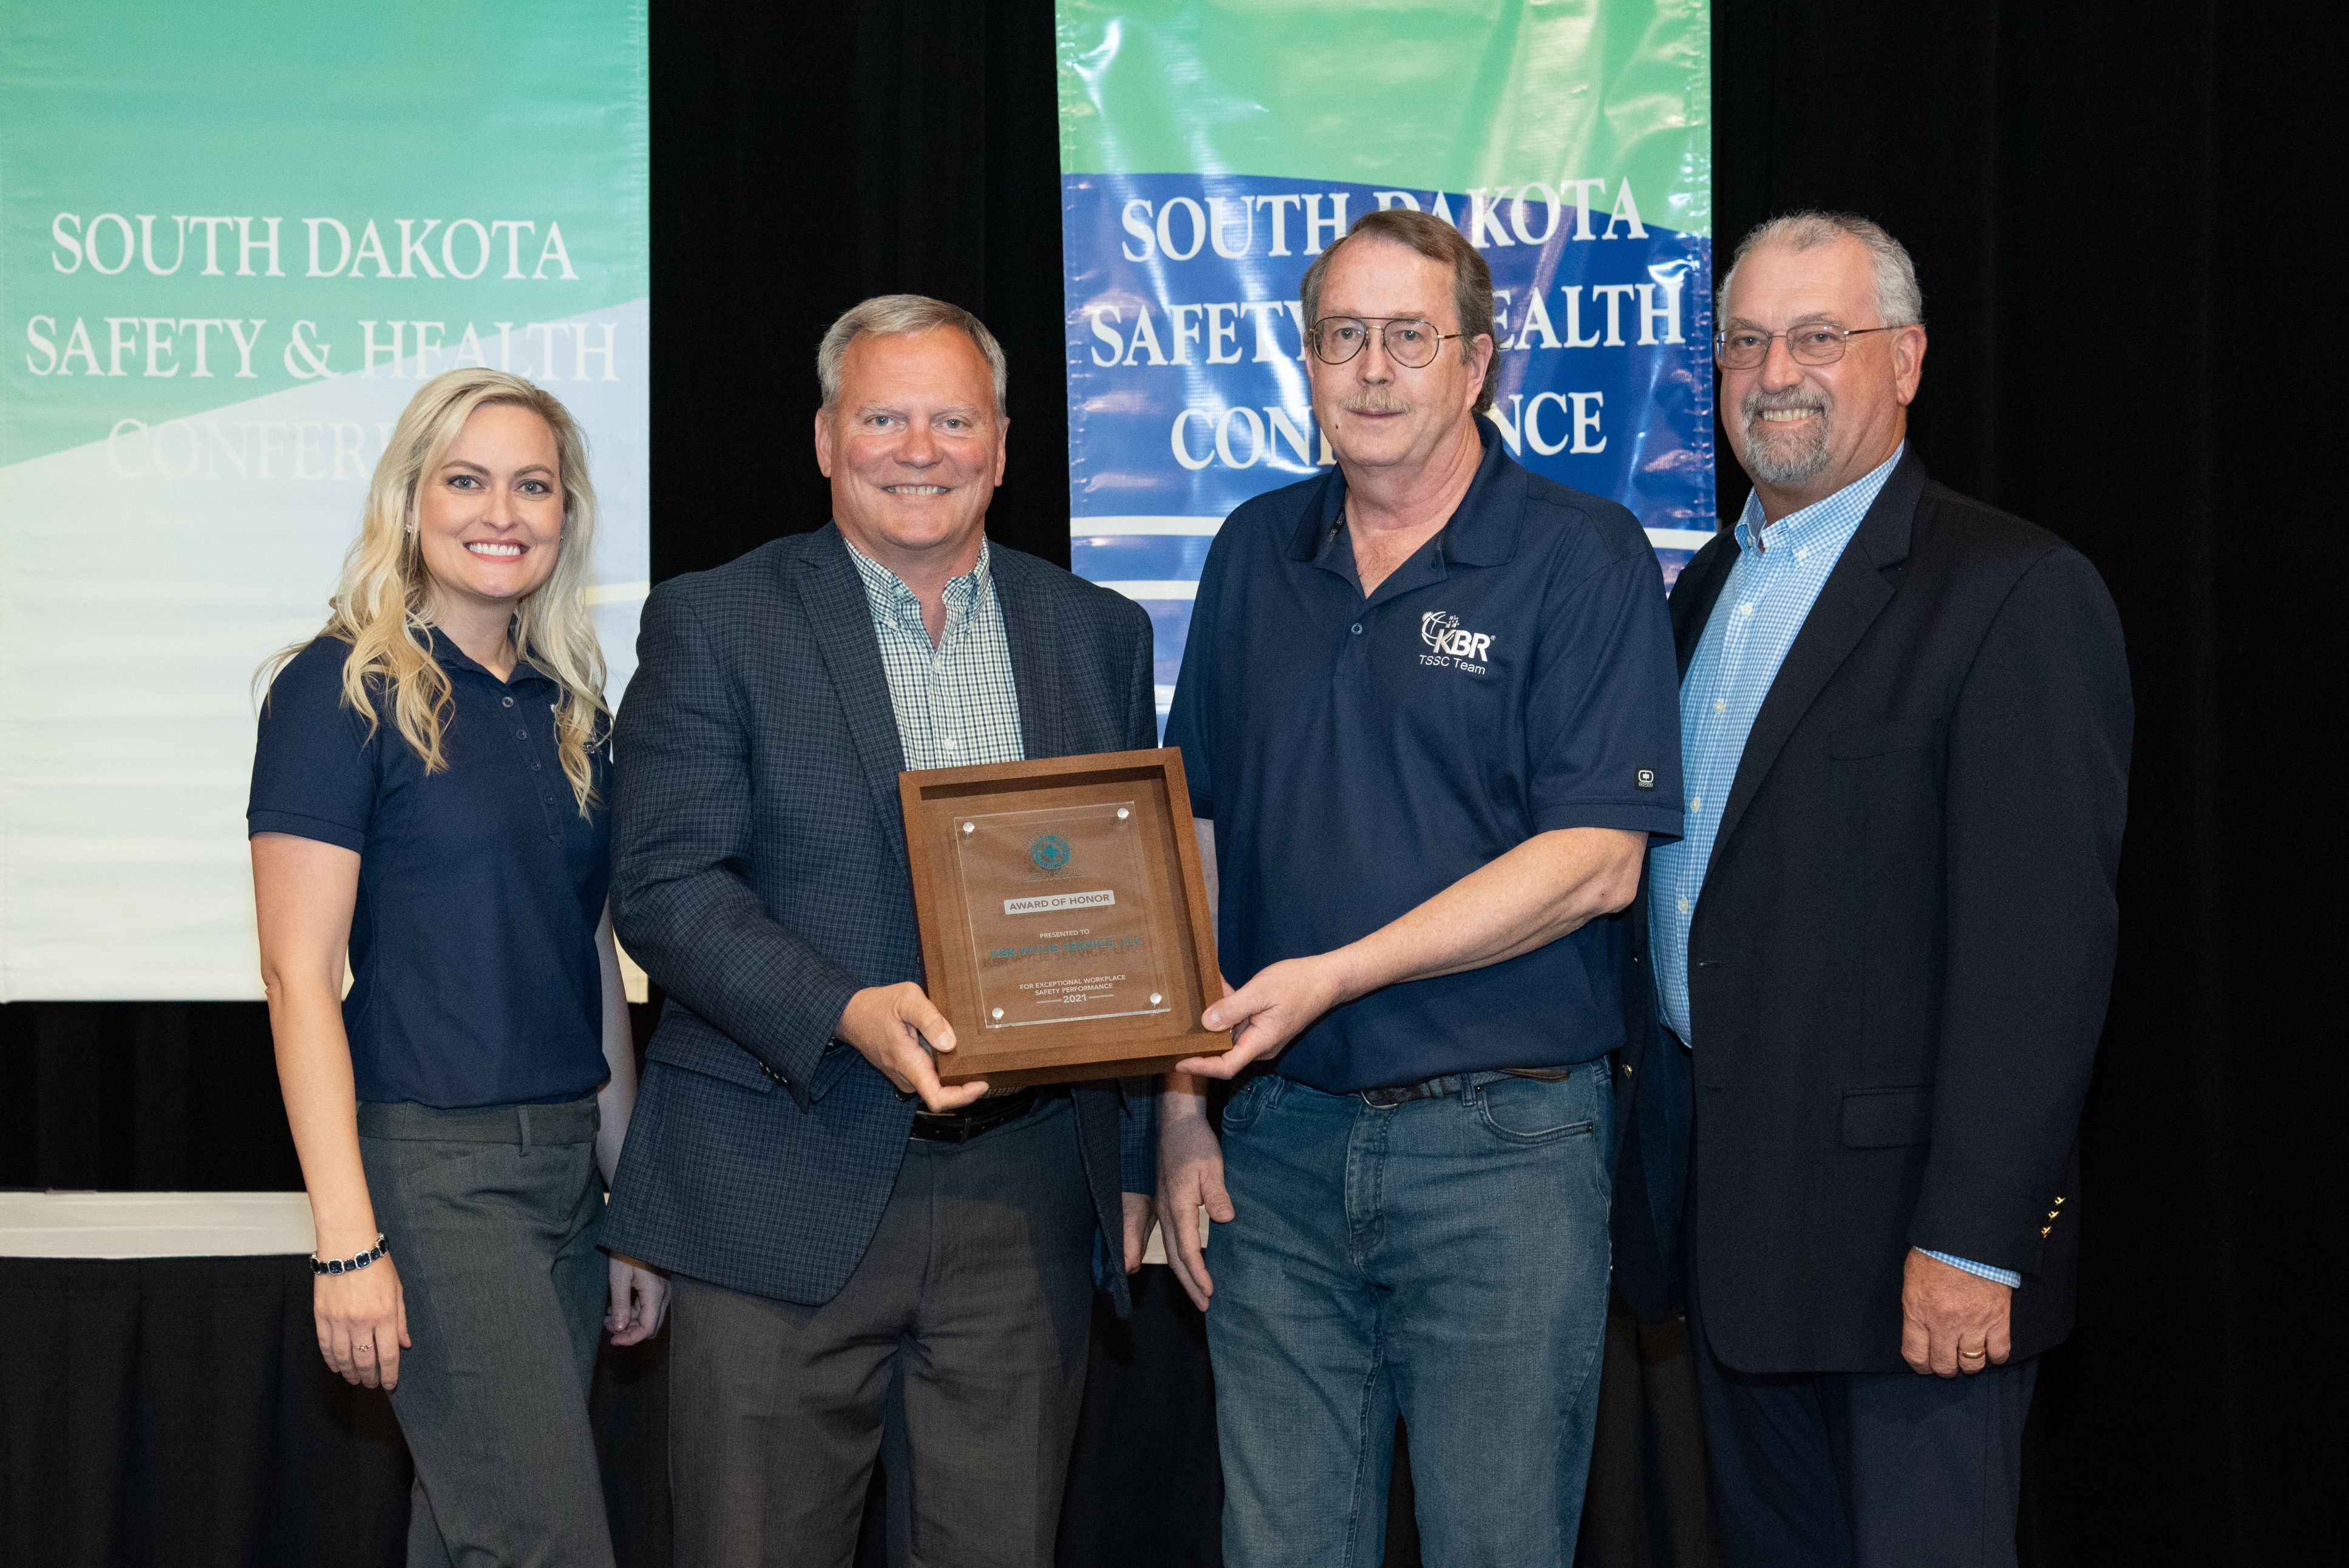 award ceremony at the 2022 South Dakota Safety and Health Conference